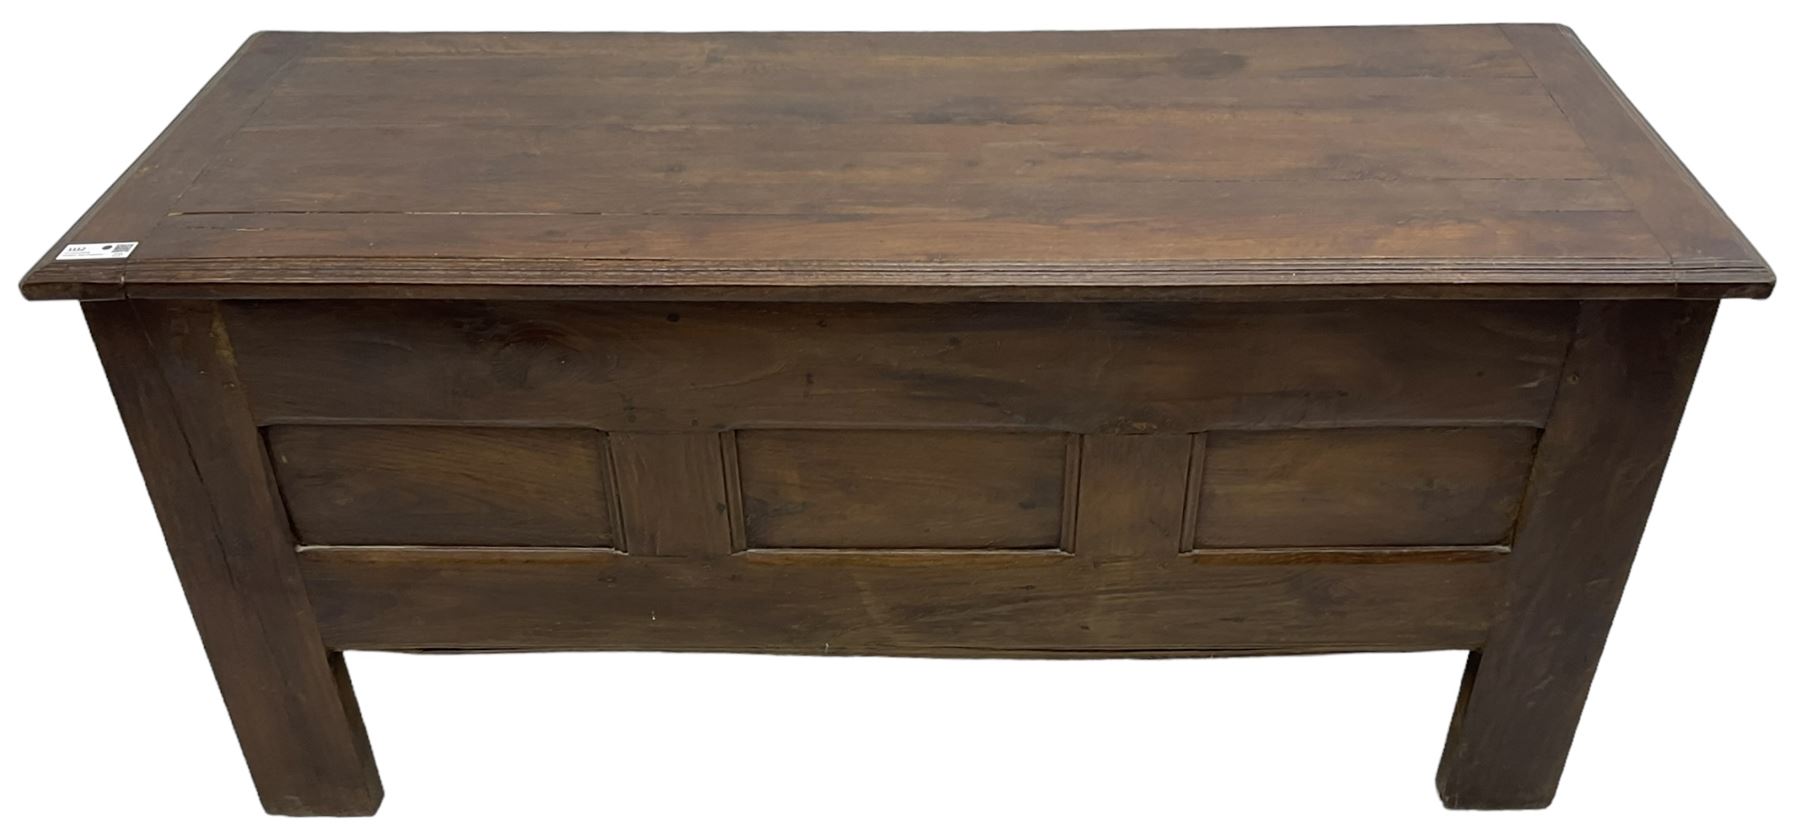 Large 18th century oak coffer or chest - Image 8 of 9